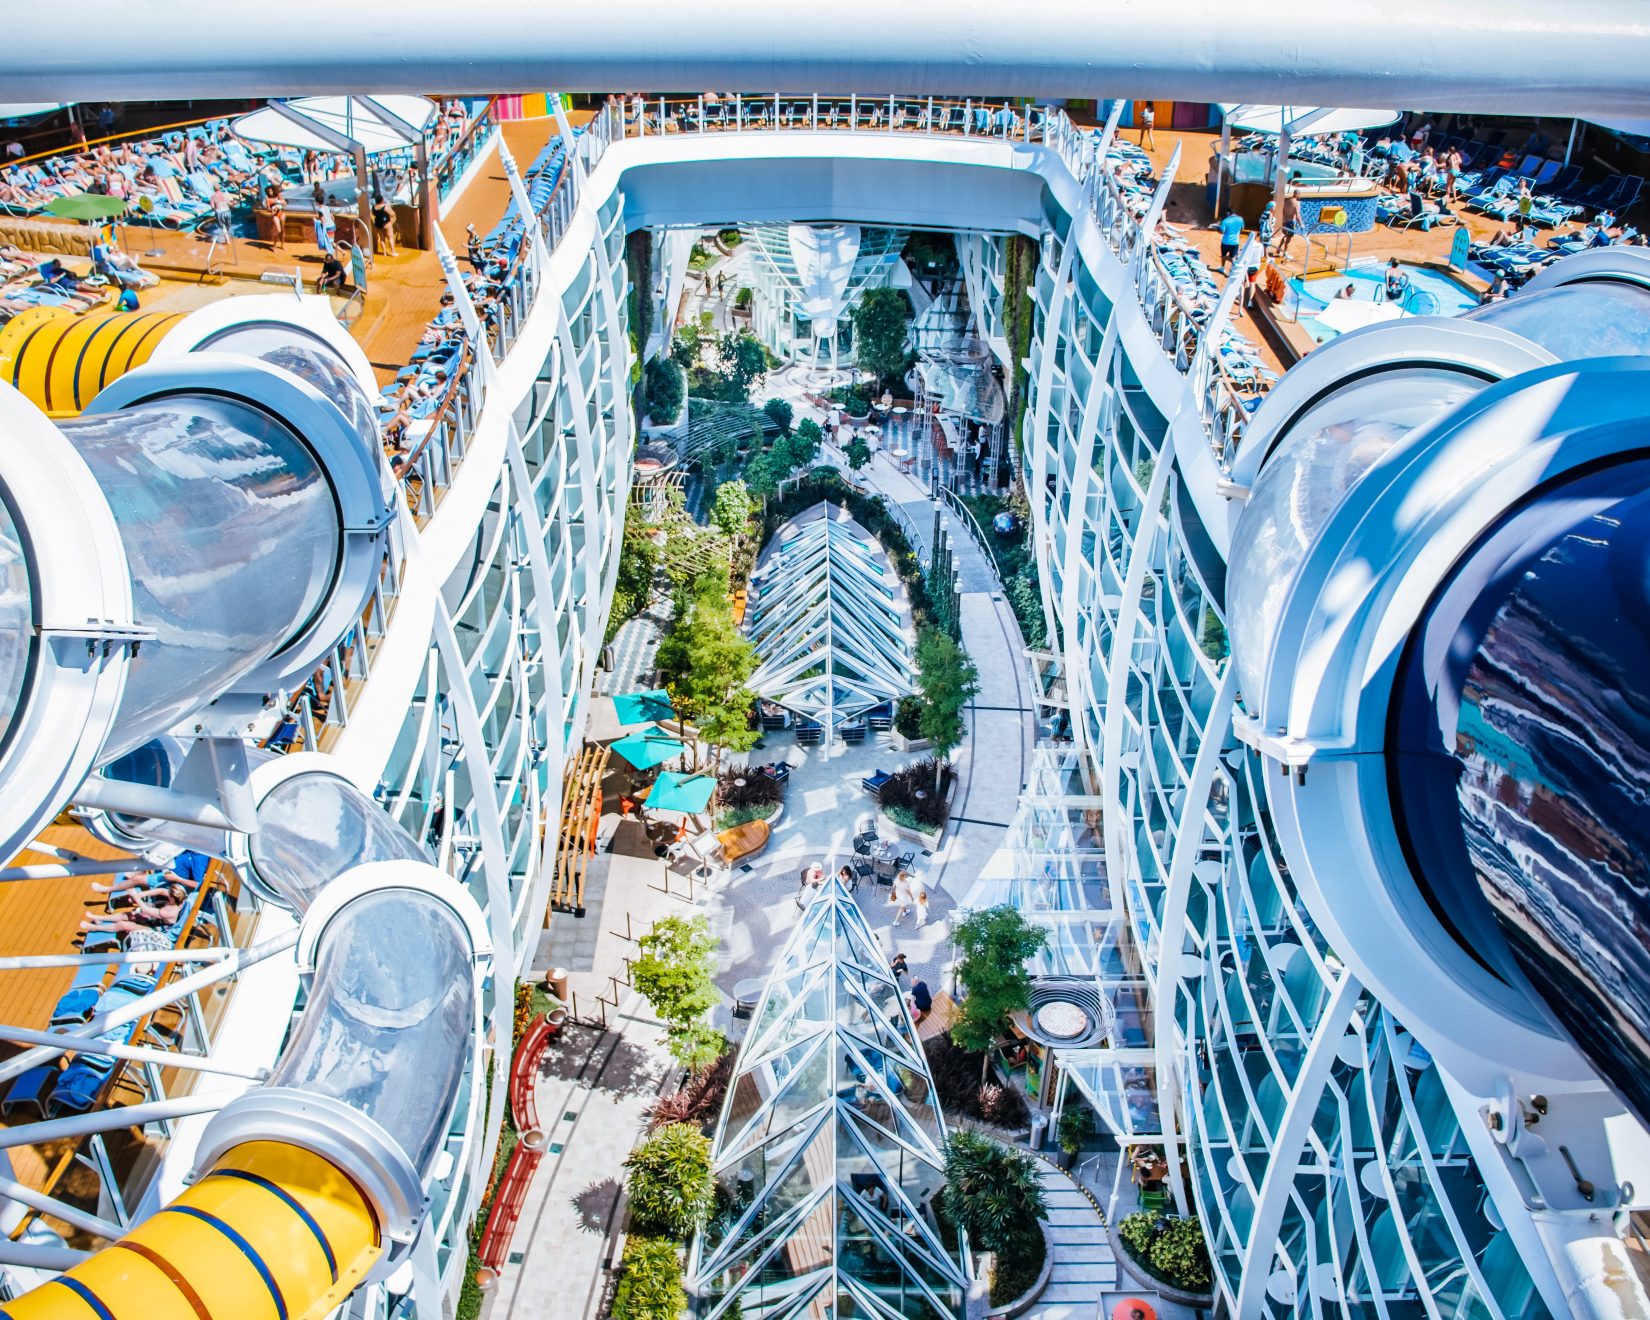 Central Park below on Harmony of the Seas